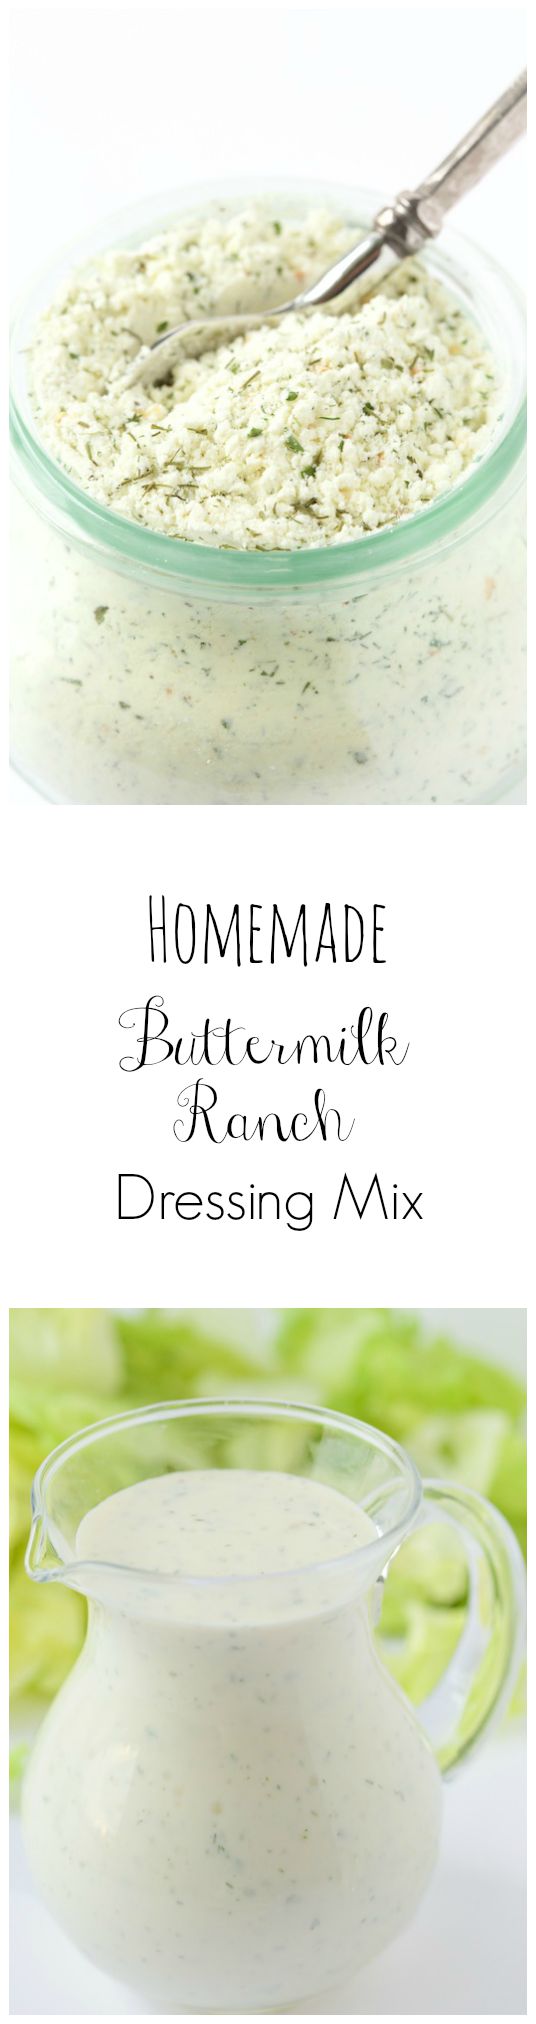 Spicy Cilantro Buttermilk Dressing - the most insanely delicious dressing you'll ever meet. Use it on salads, pizza, sandwiches, as a dip for chips or veggies, on nachos, quesadillas, salmon...